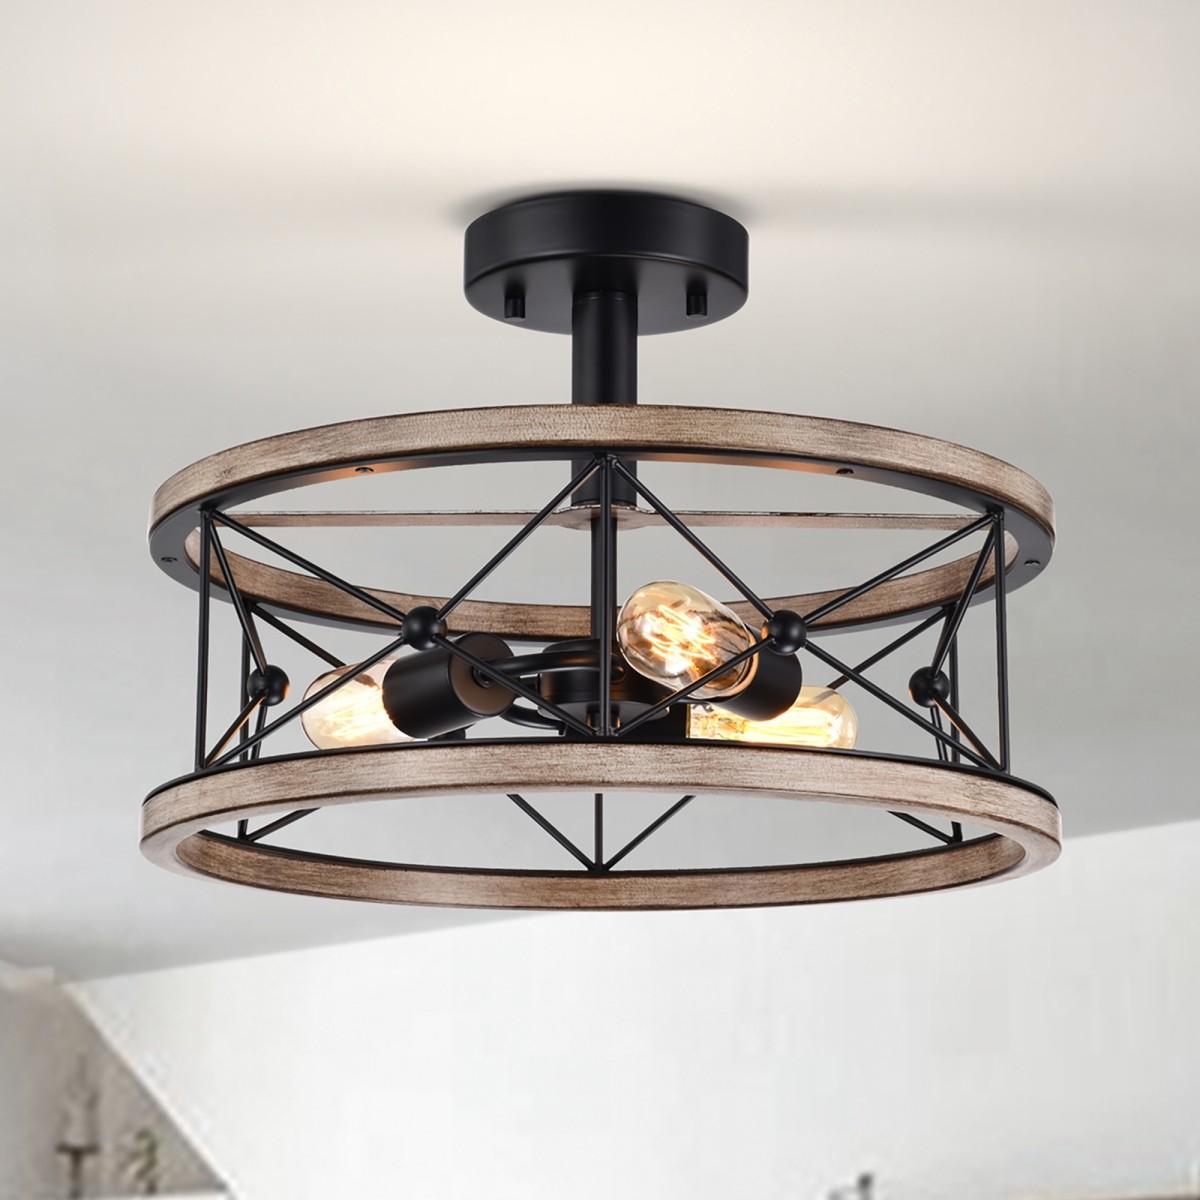 Sabinara 17 in. 3-Light Indoor Matte Black and Faux Wood Grain Finish Chandelier with Light Kit